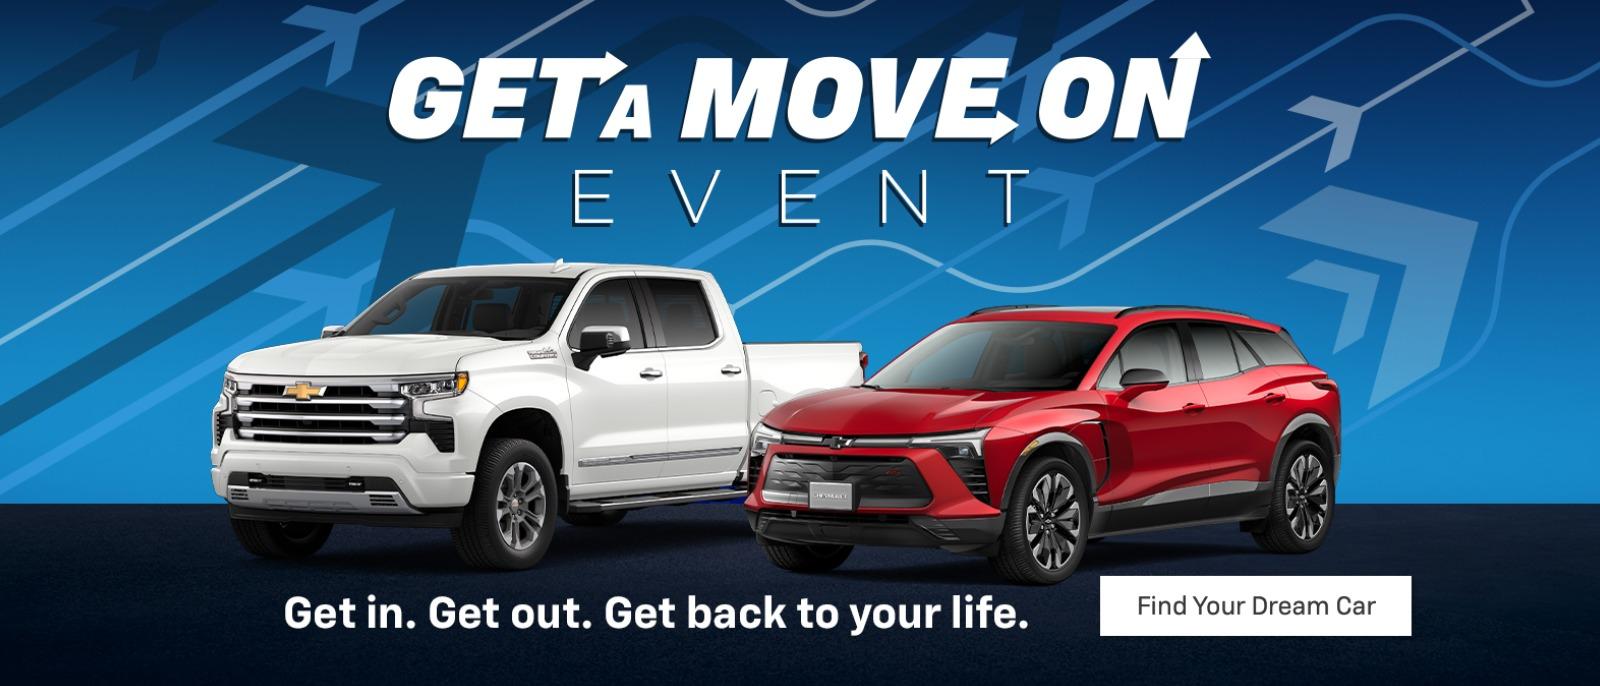 GET A MOVE ON EVENT